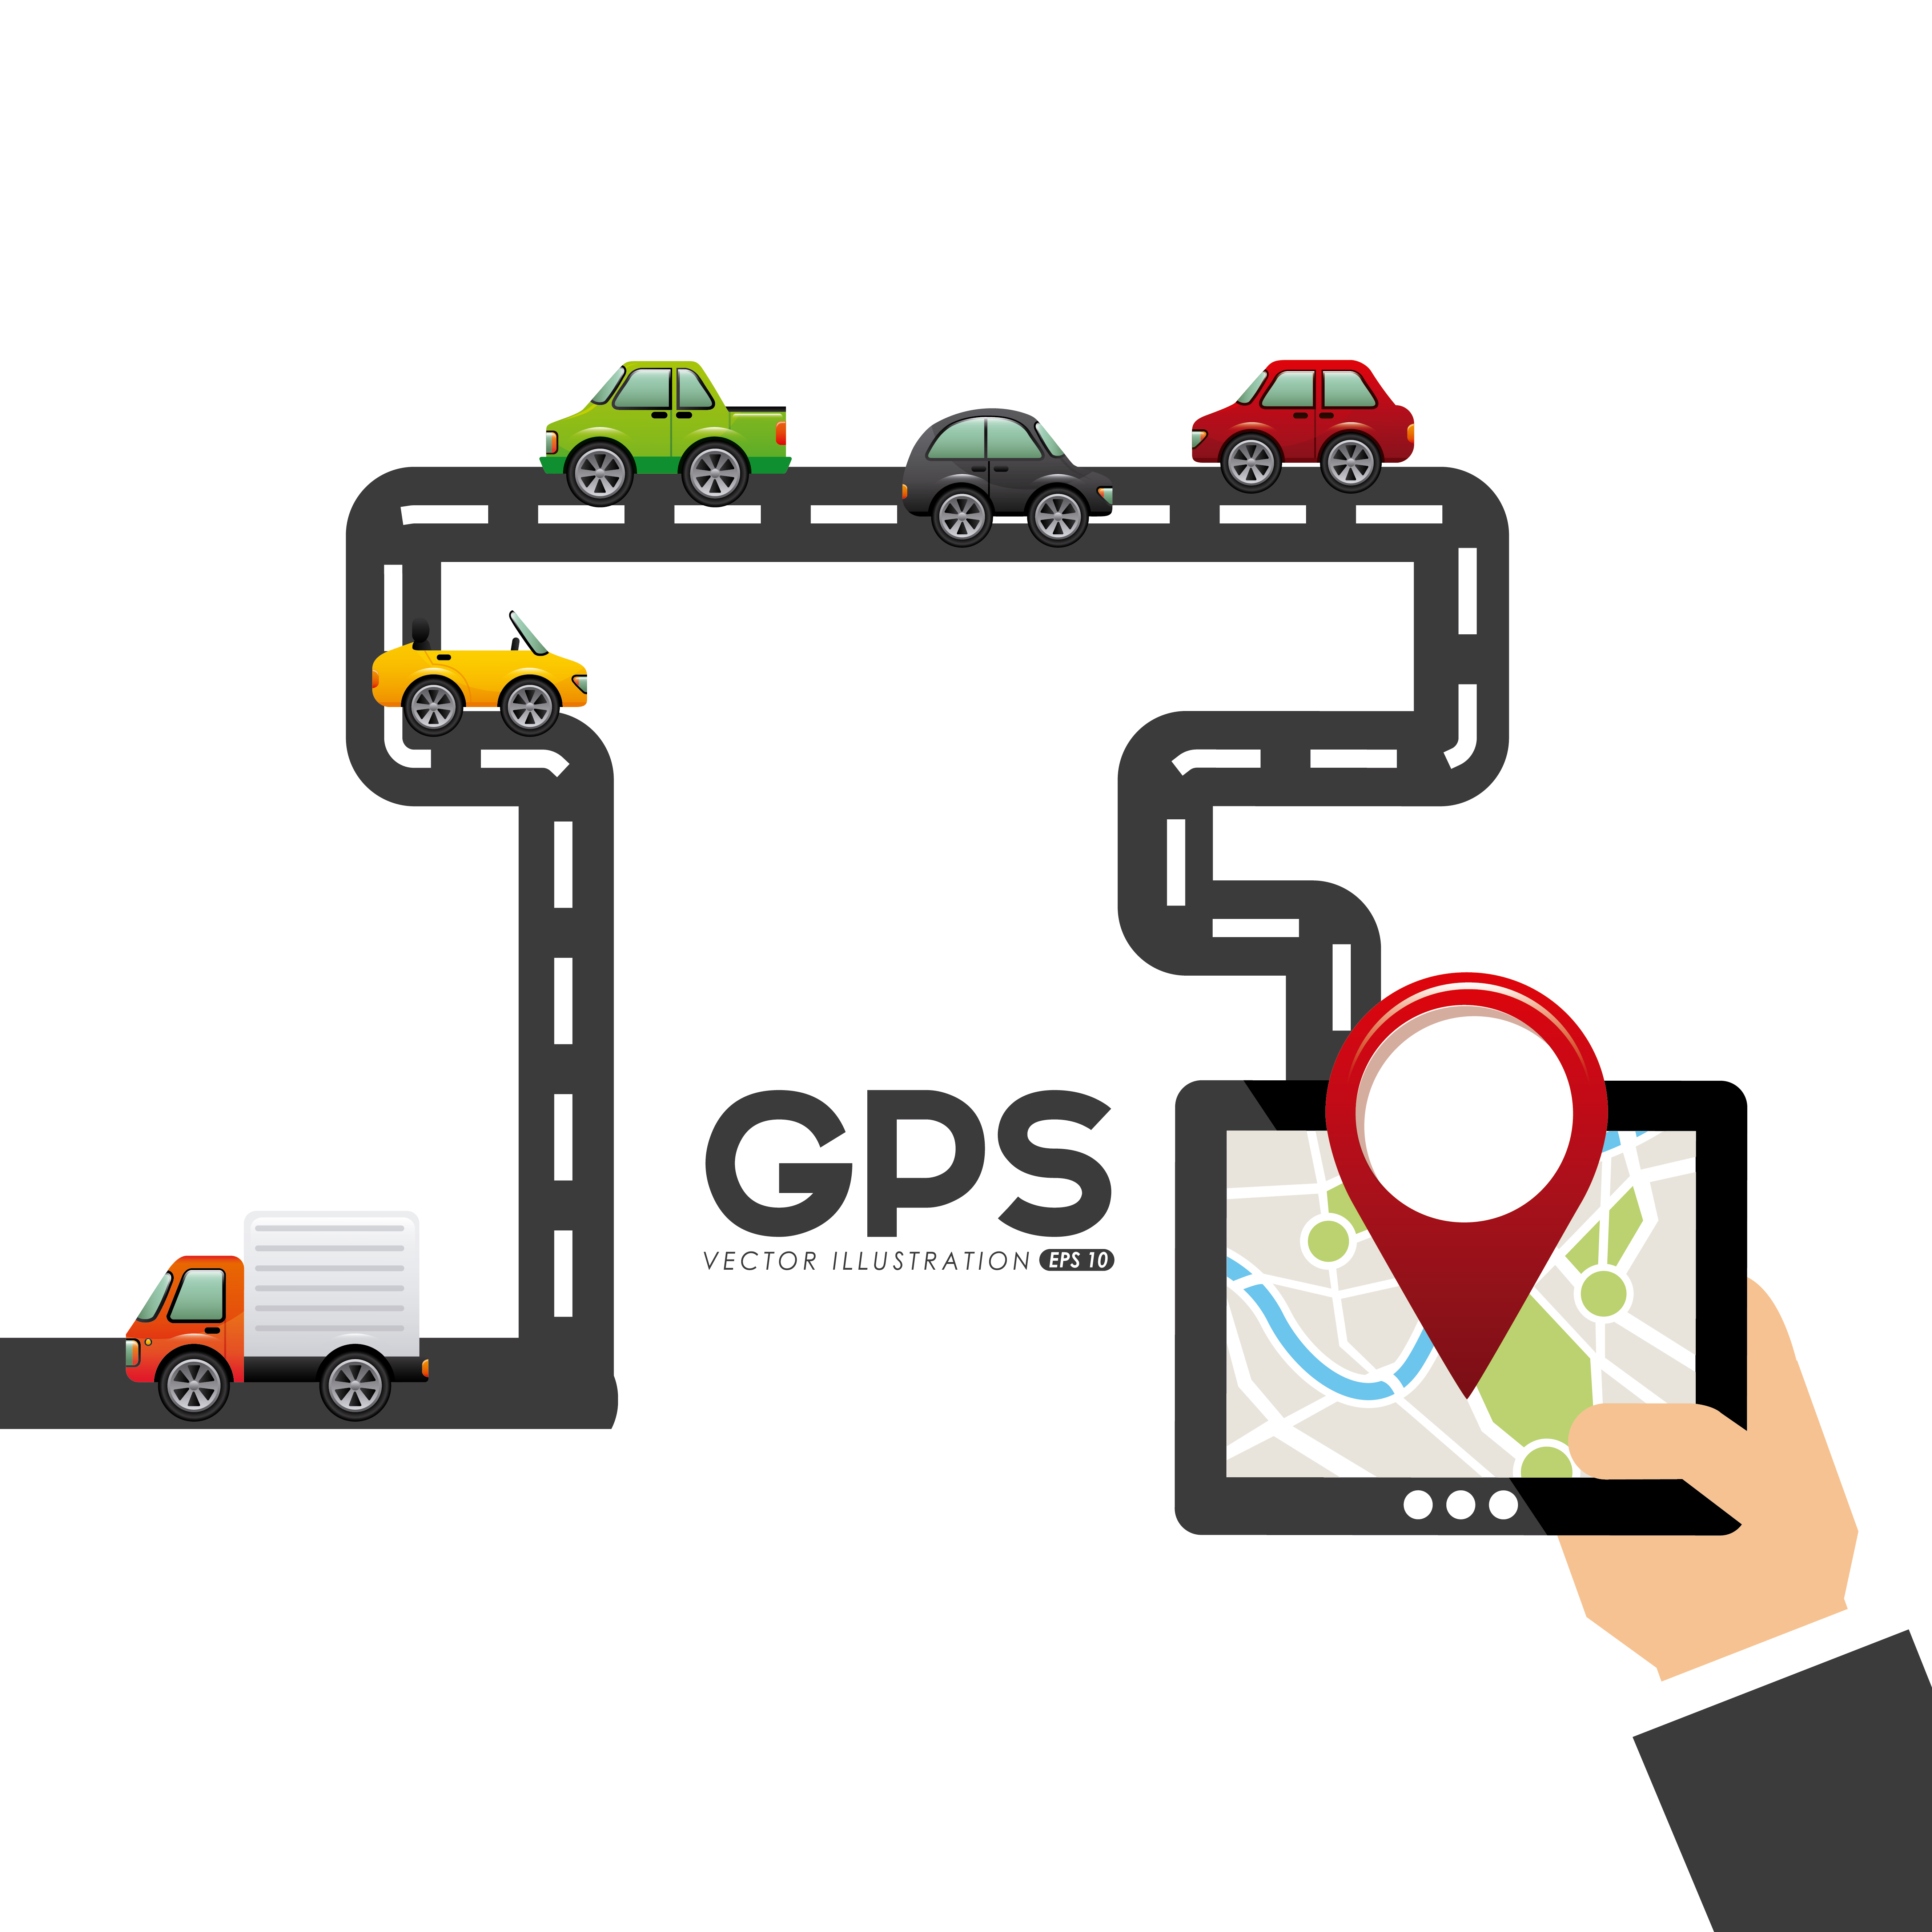 What can a vehicle tracking system do for me?